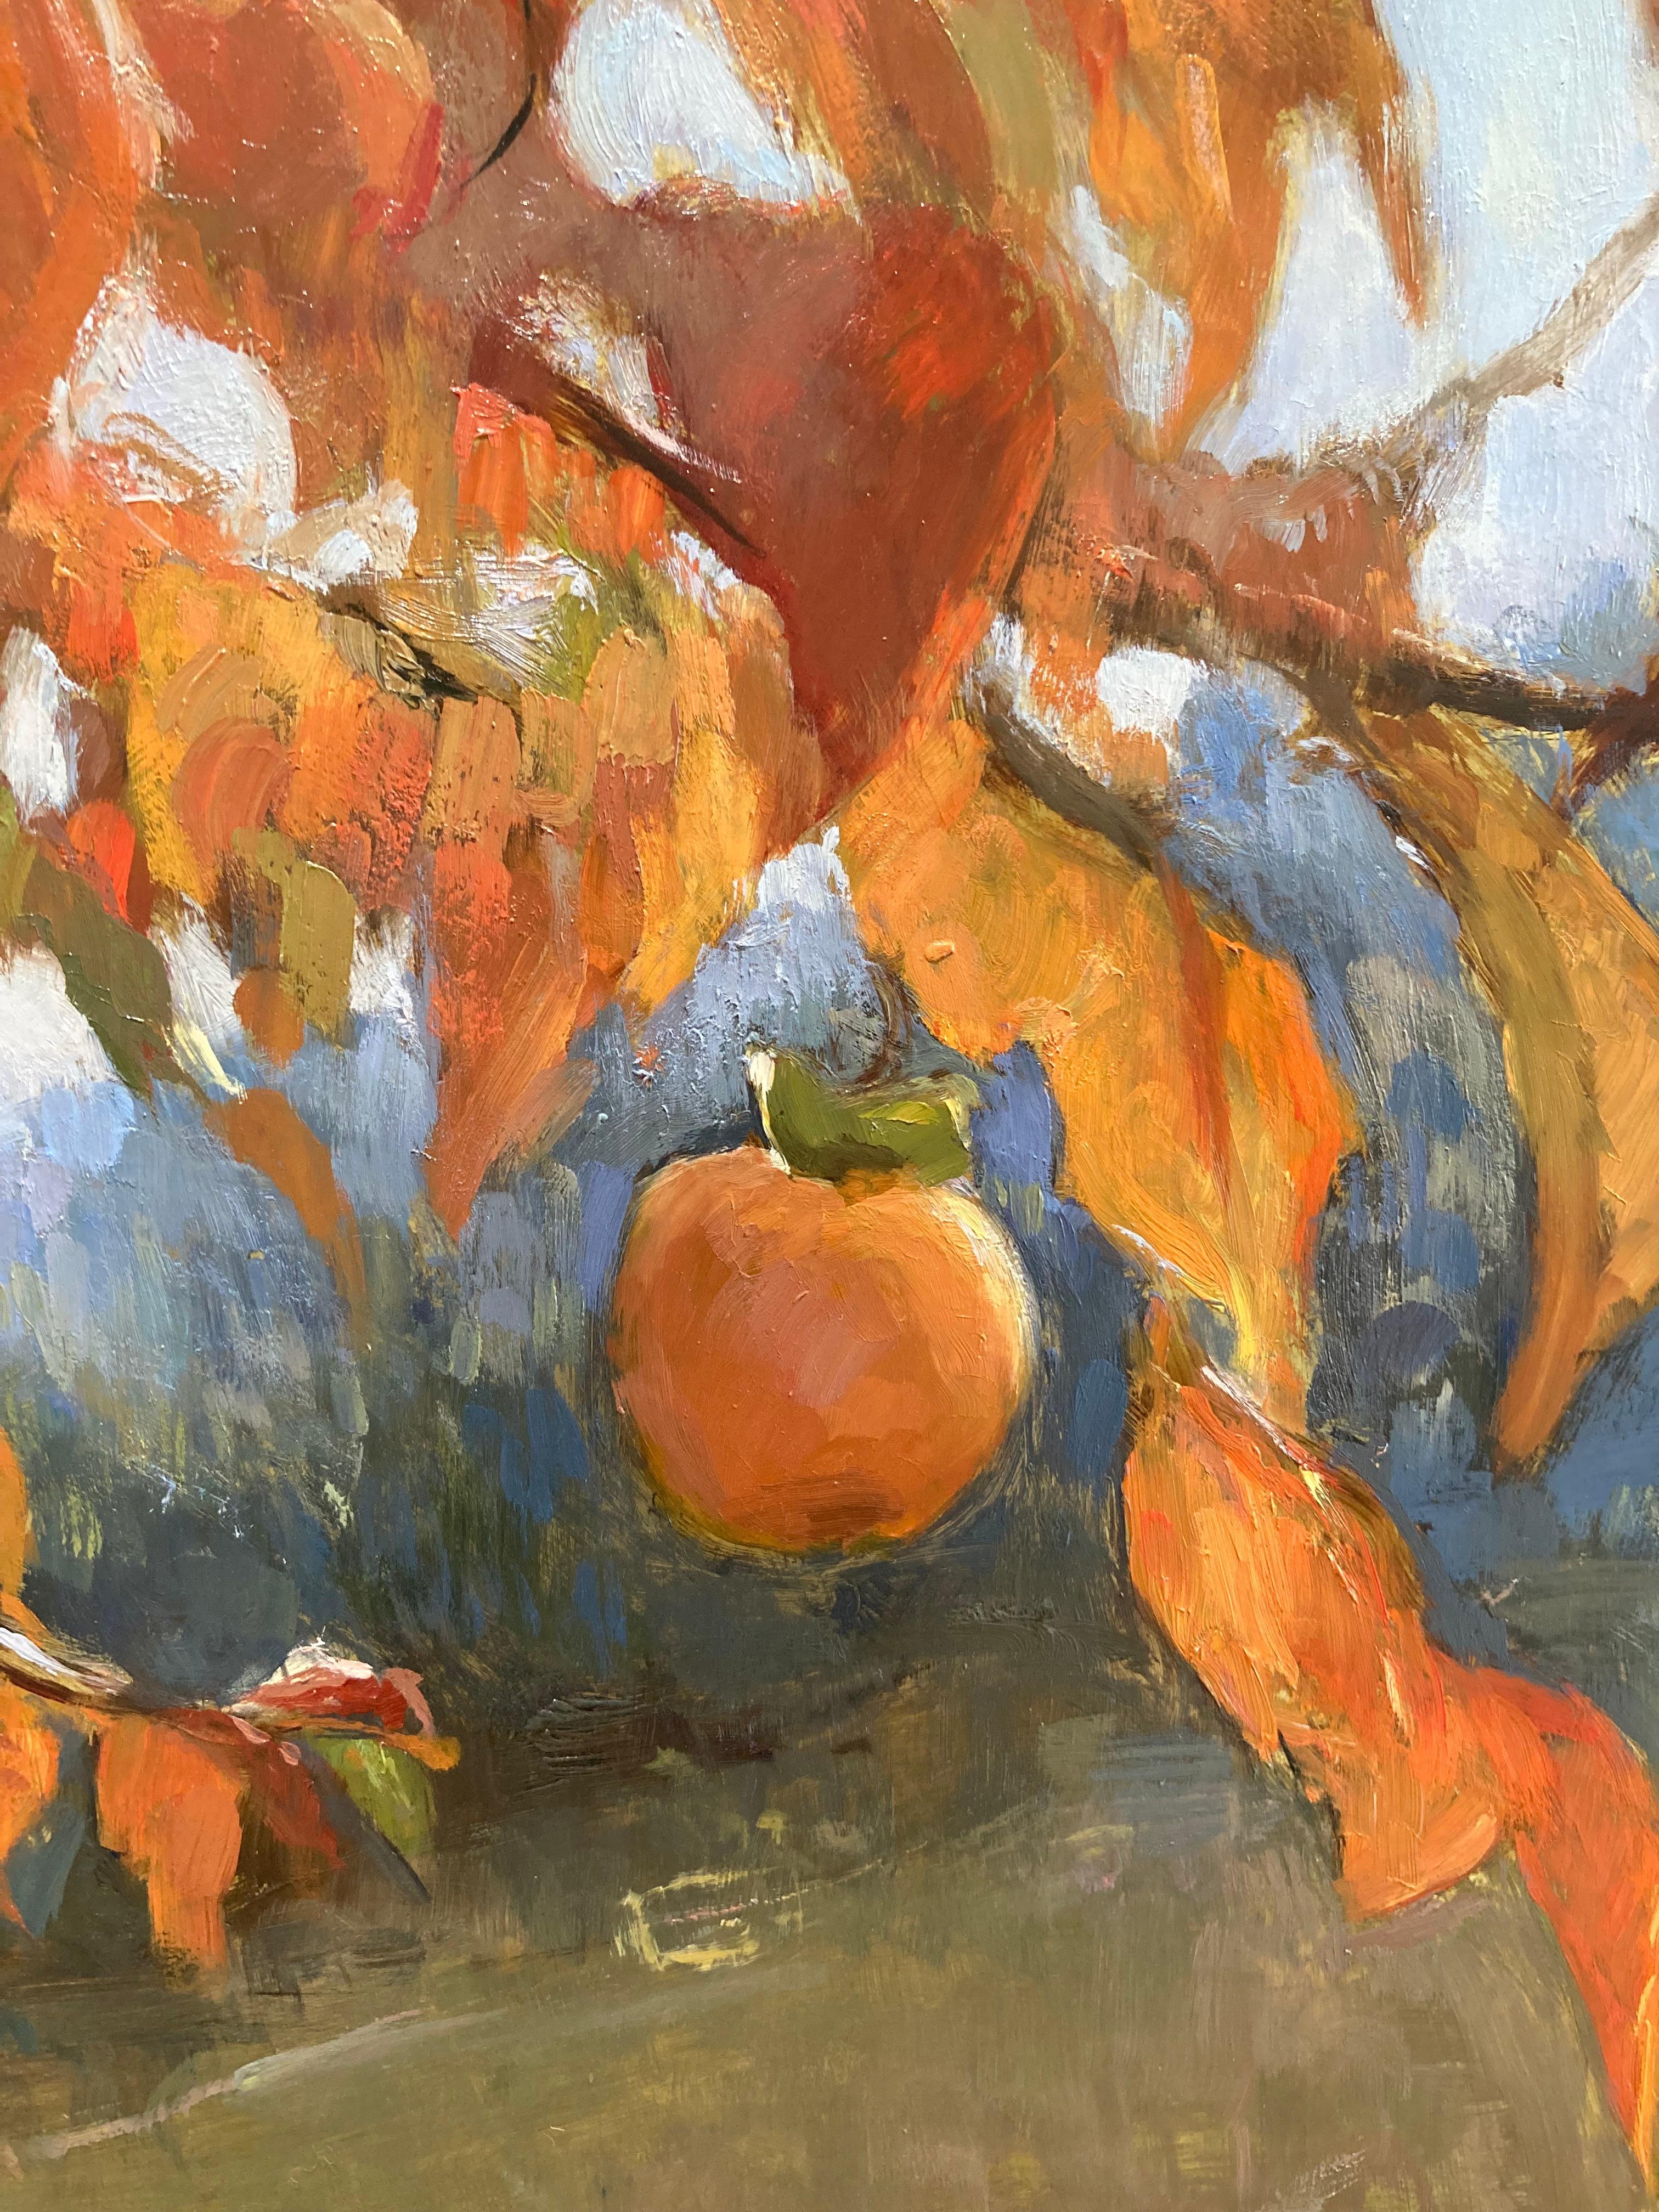 An oil painting on brass. Franklin Sanchez often uses her immediate surroundings in her Tuscany home for inspiration. This persimmon tree in her backyard is a subject she often comes back to. Its bright orange leaves and buxom fruits make a lovely